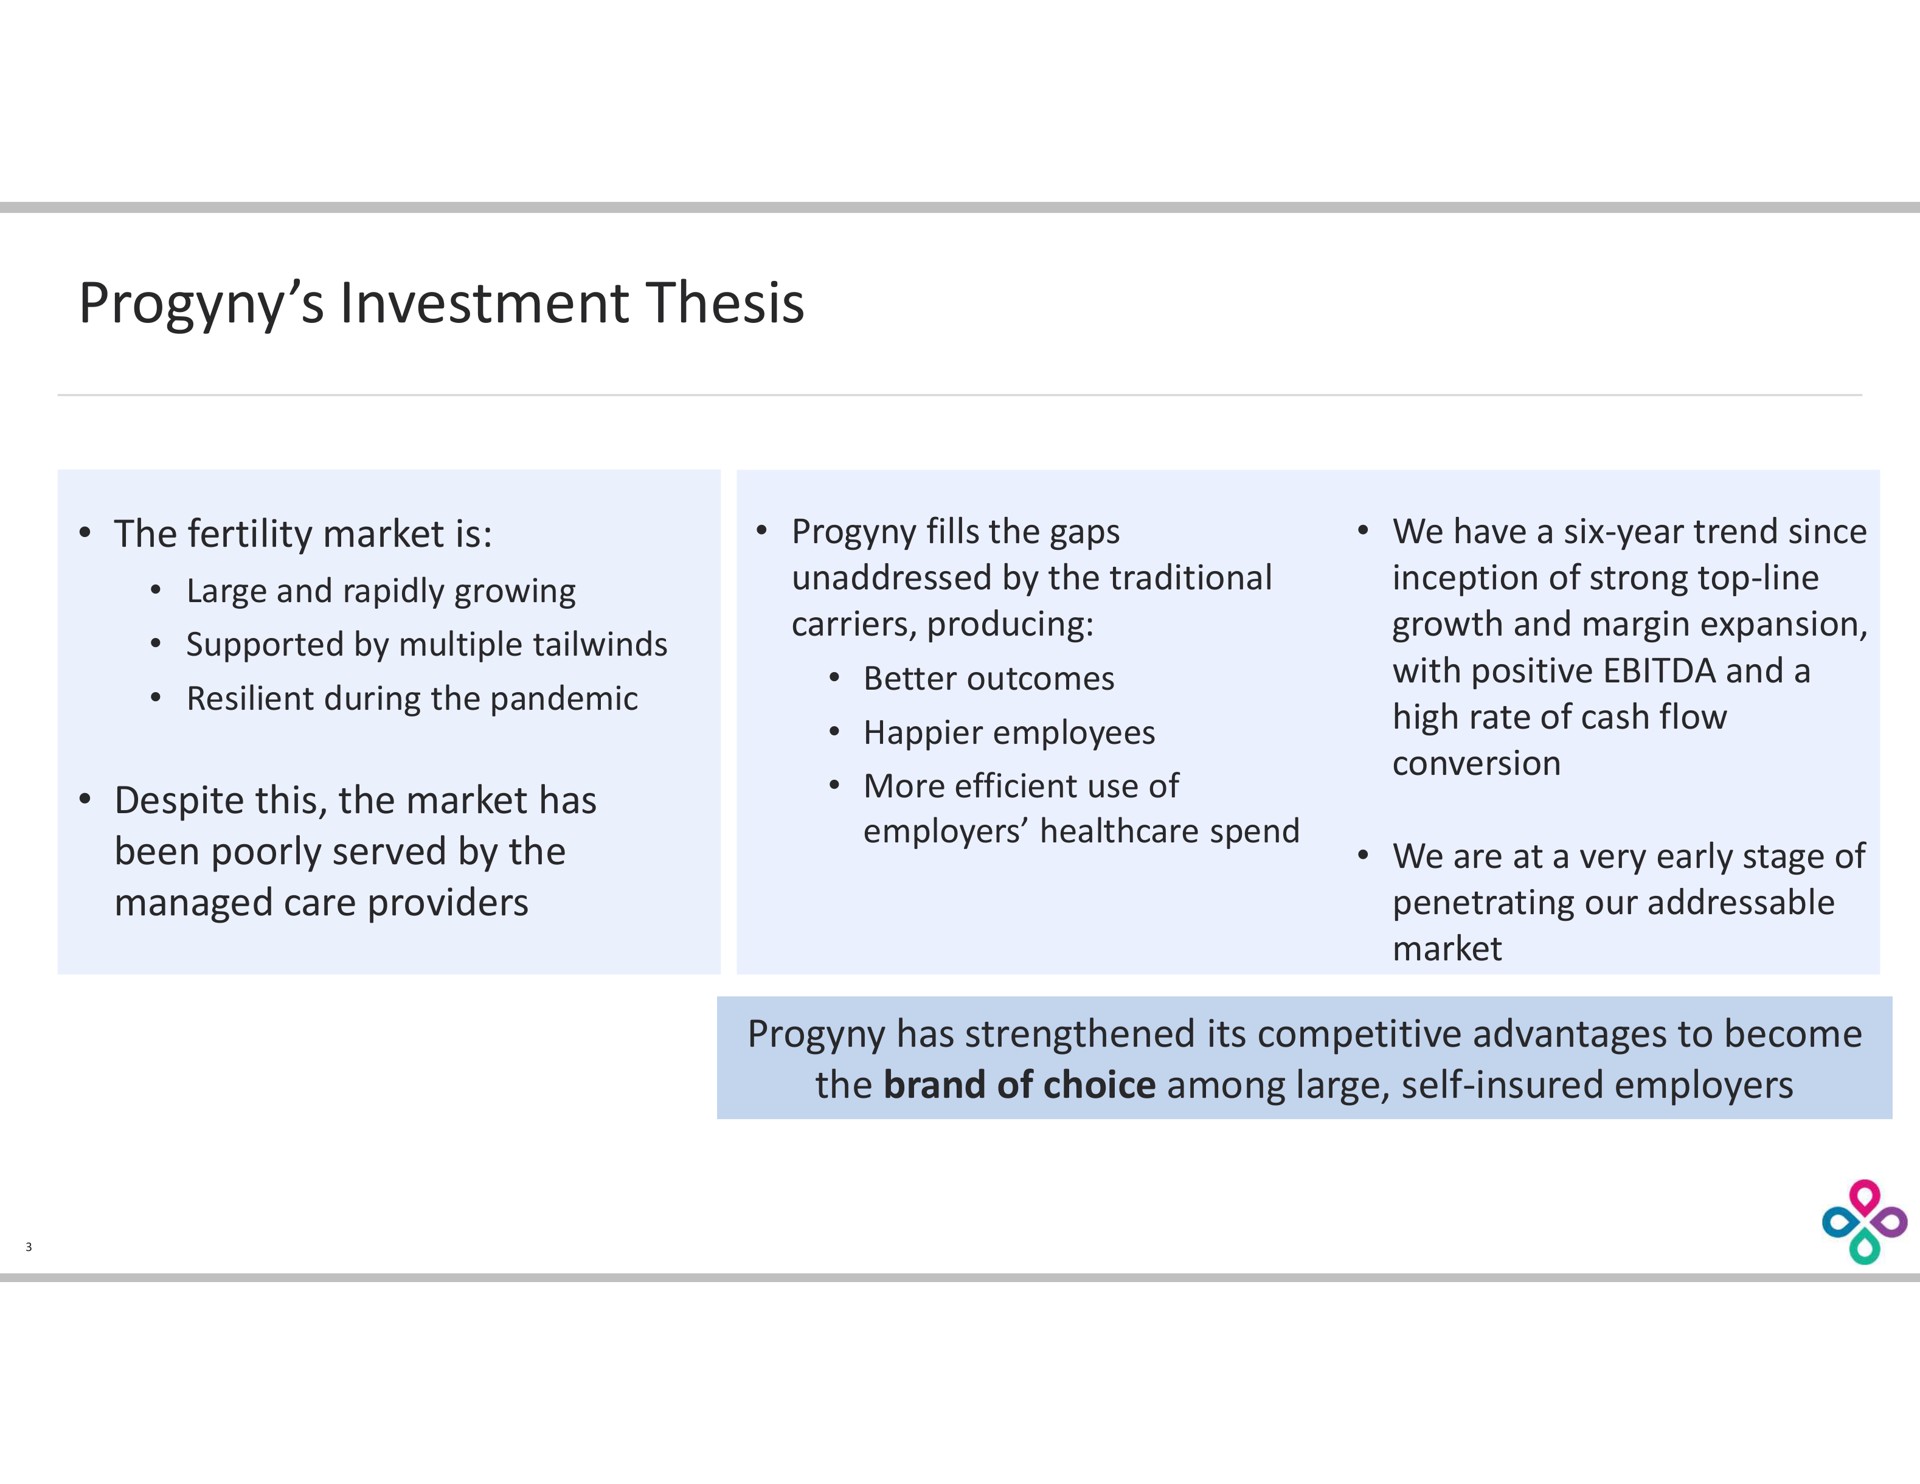 investment thesis | Progyny